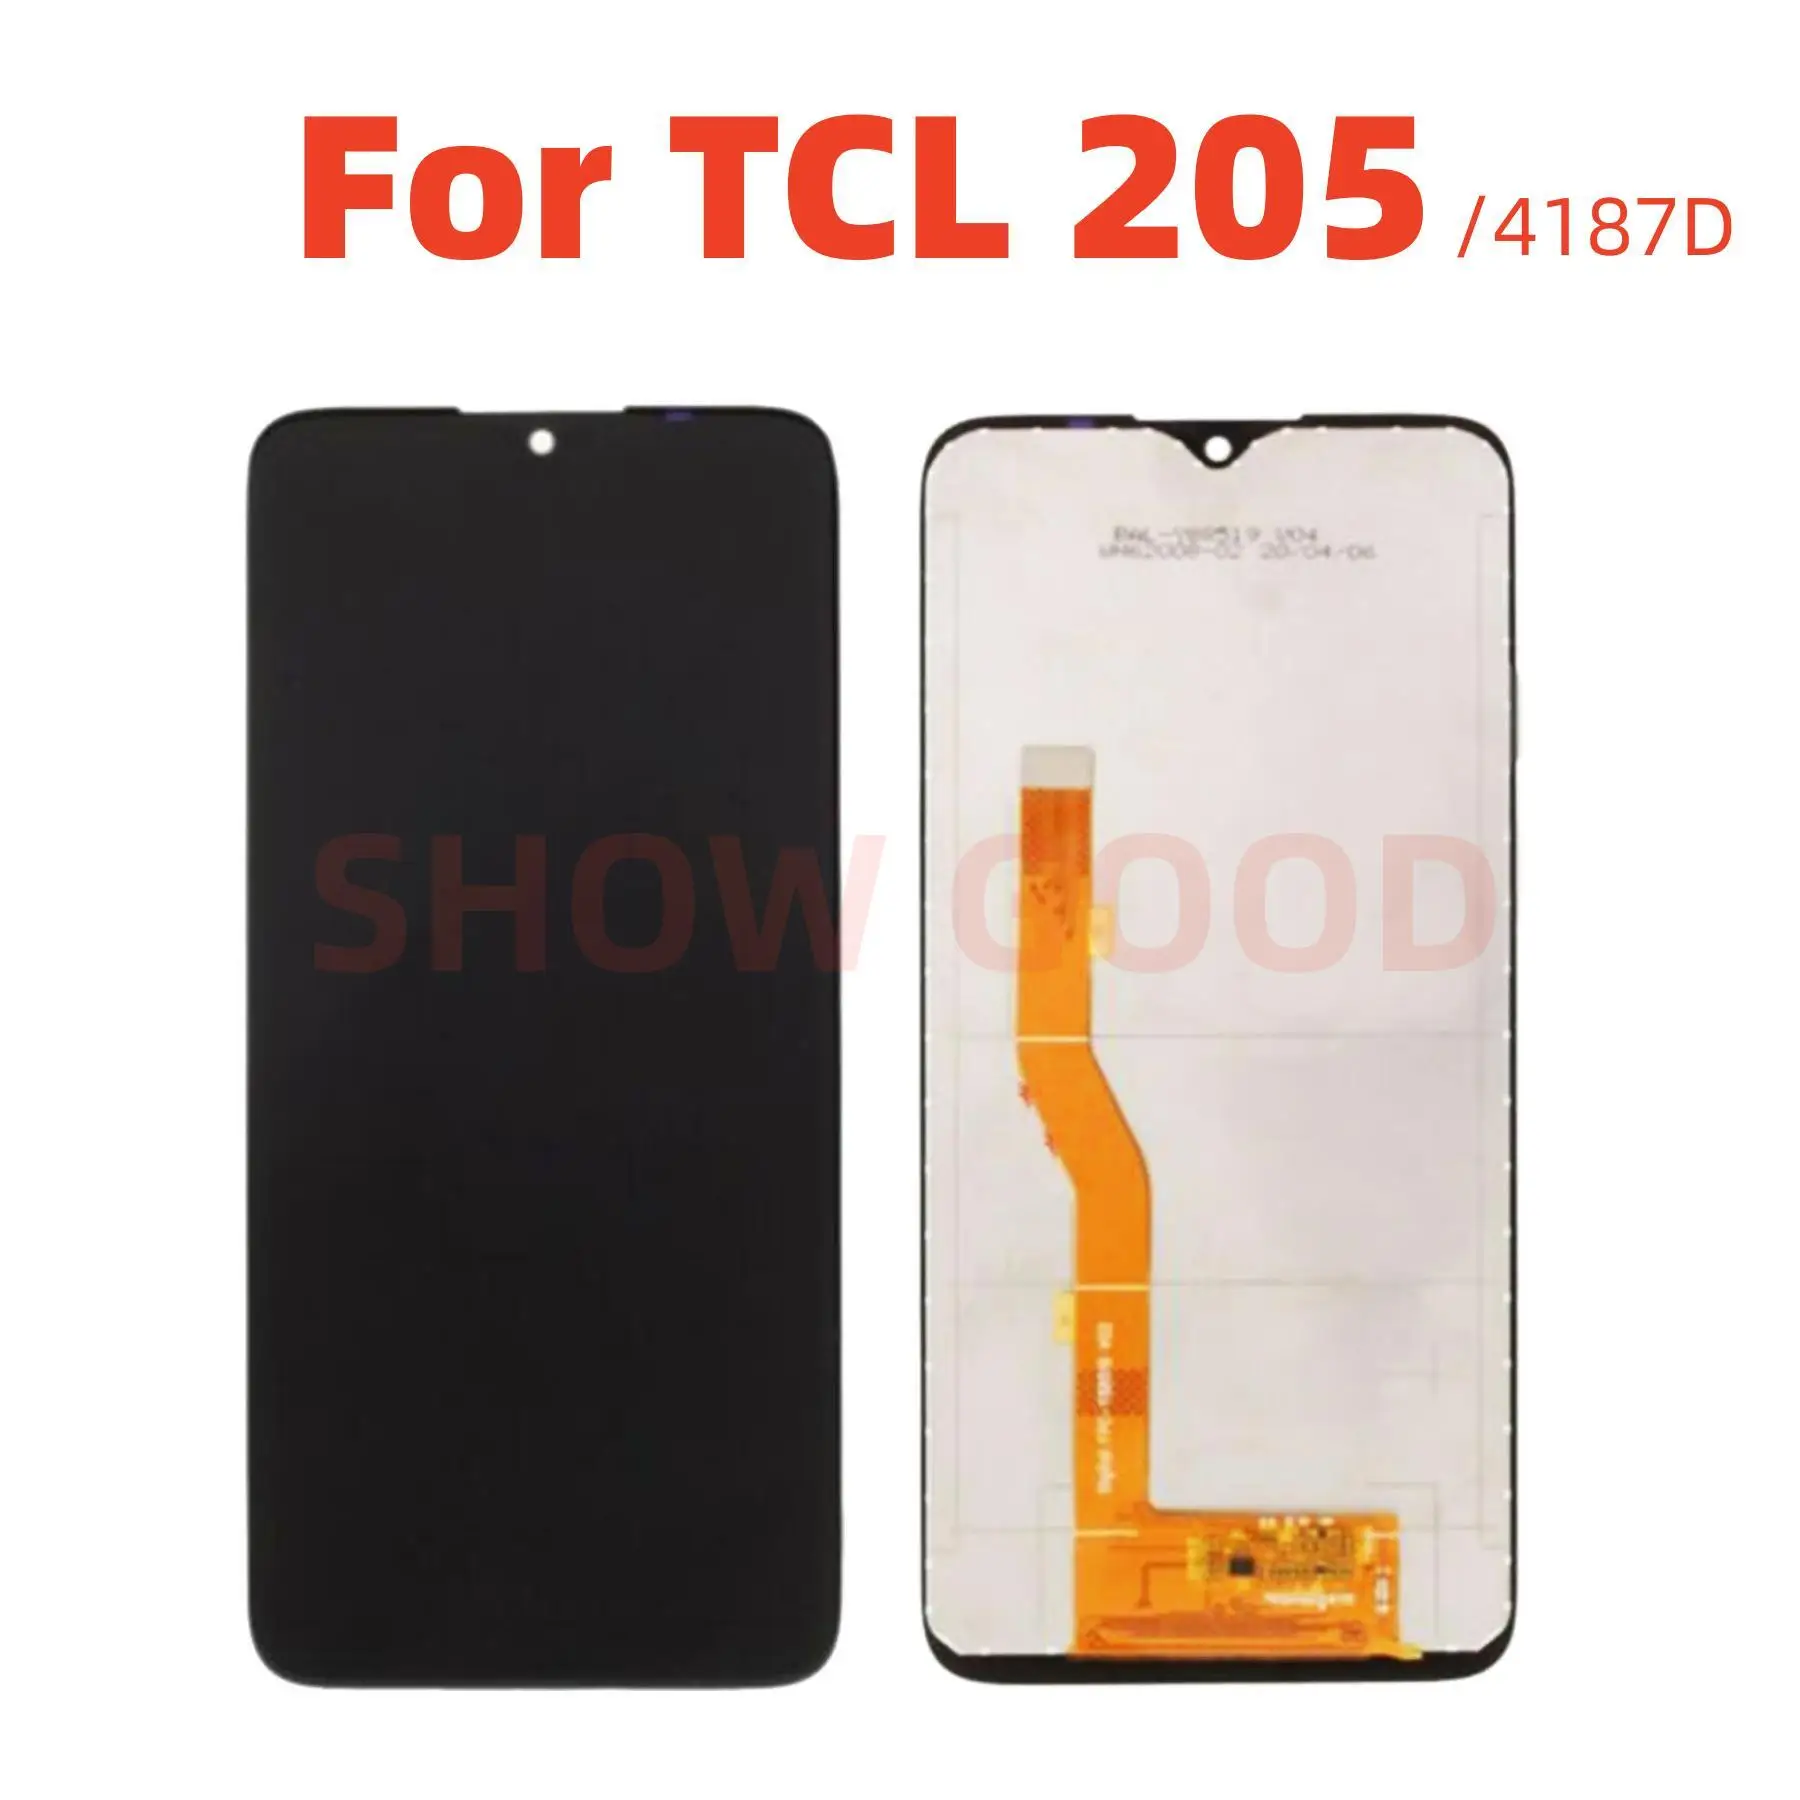 

Original LCD For TCL 205 4187D Display Premium Quality Touch Screen Replacement Parts Mobile Phones Repair Free Tools